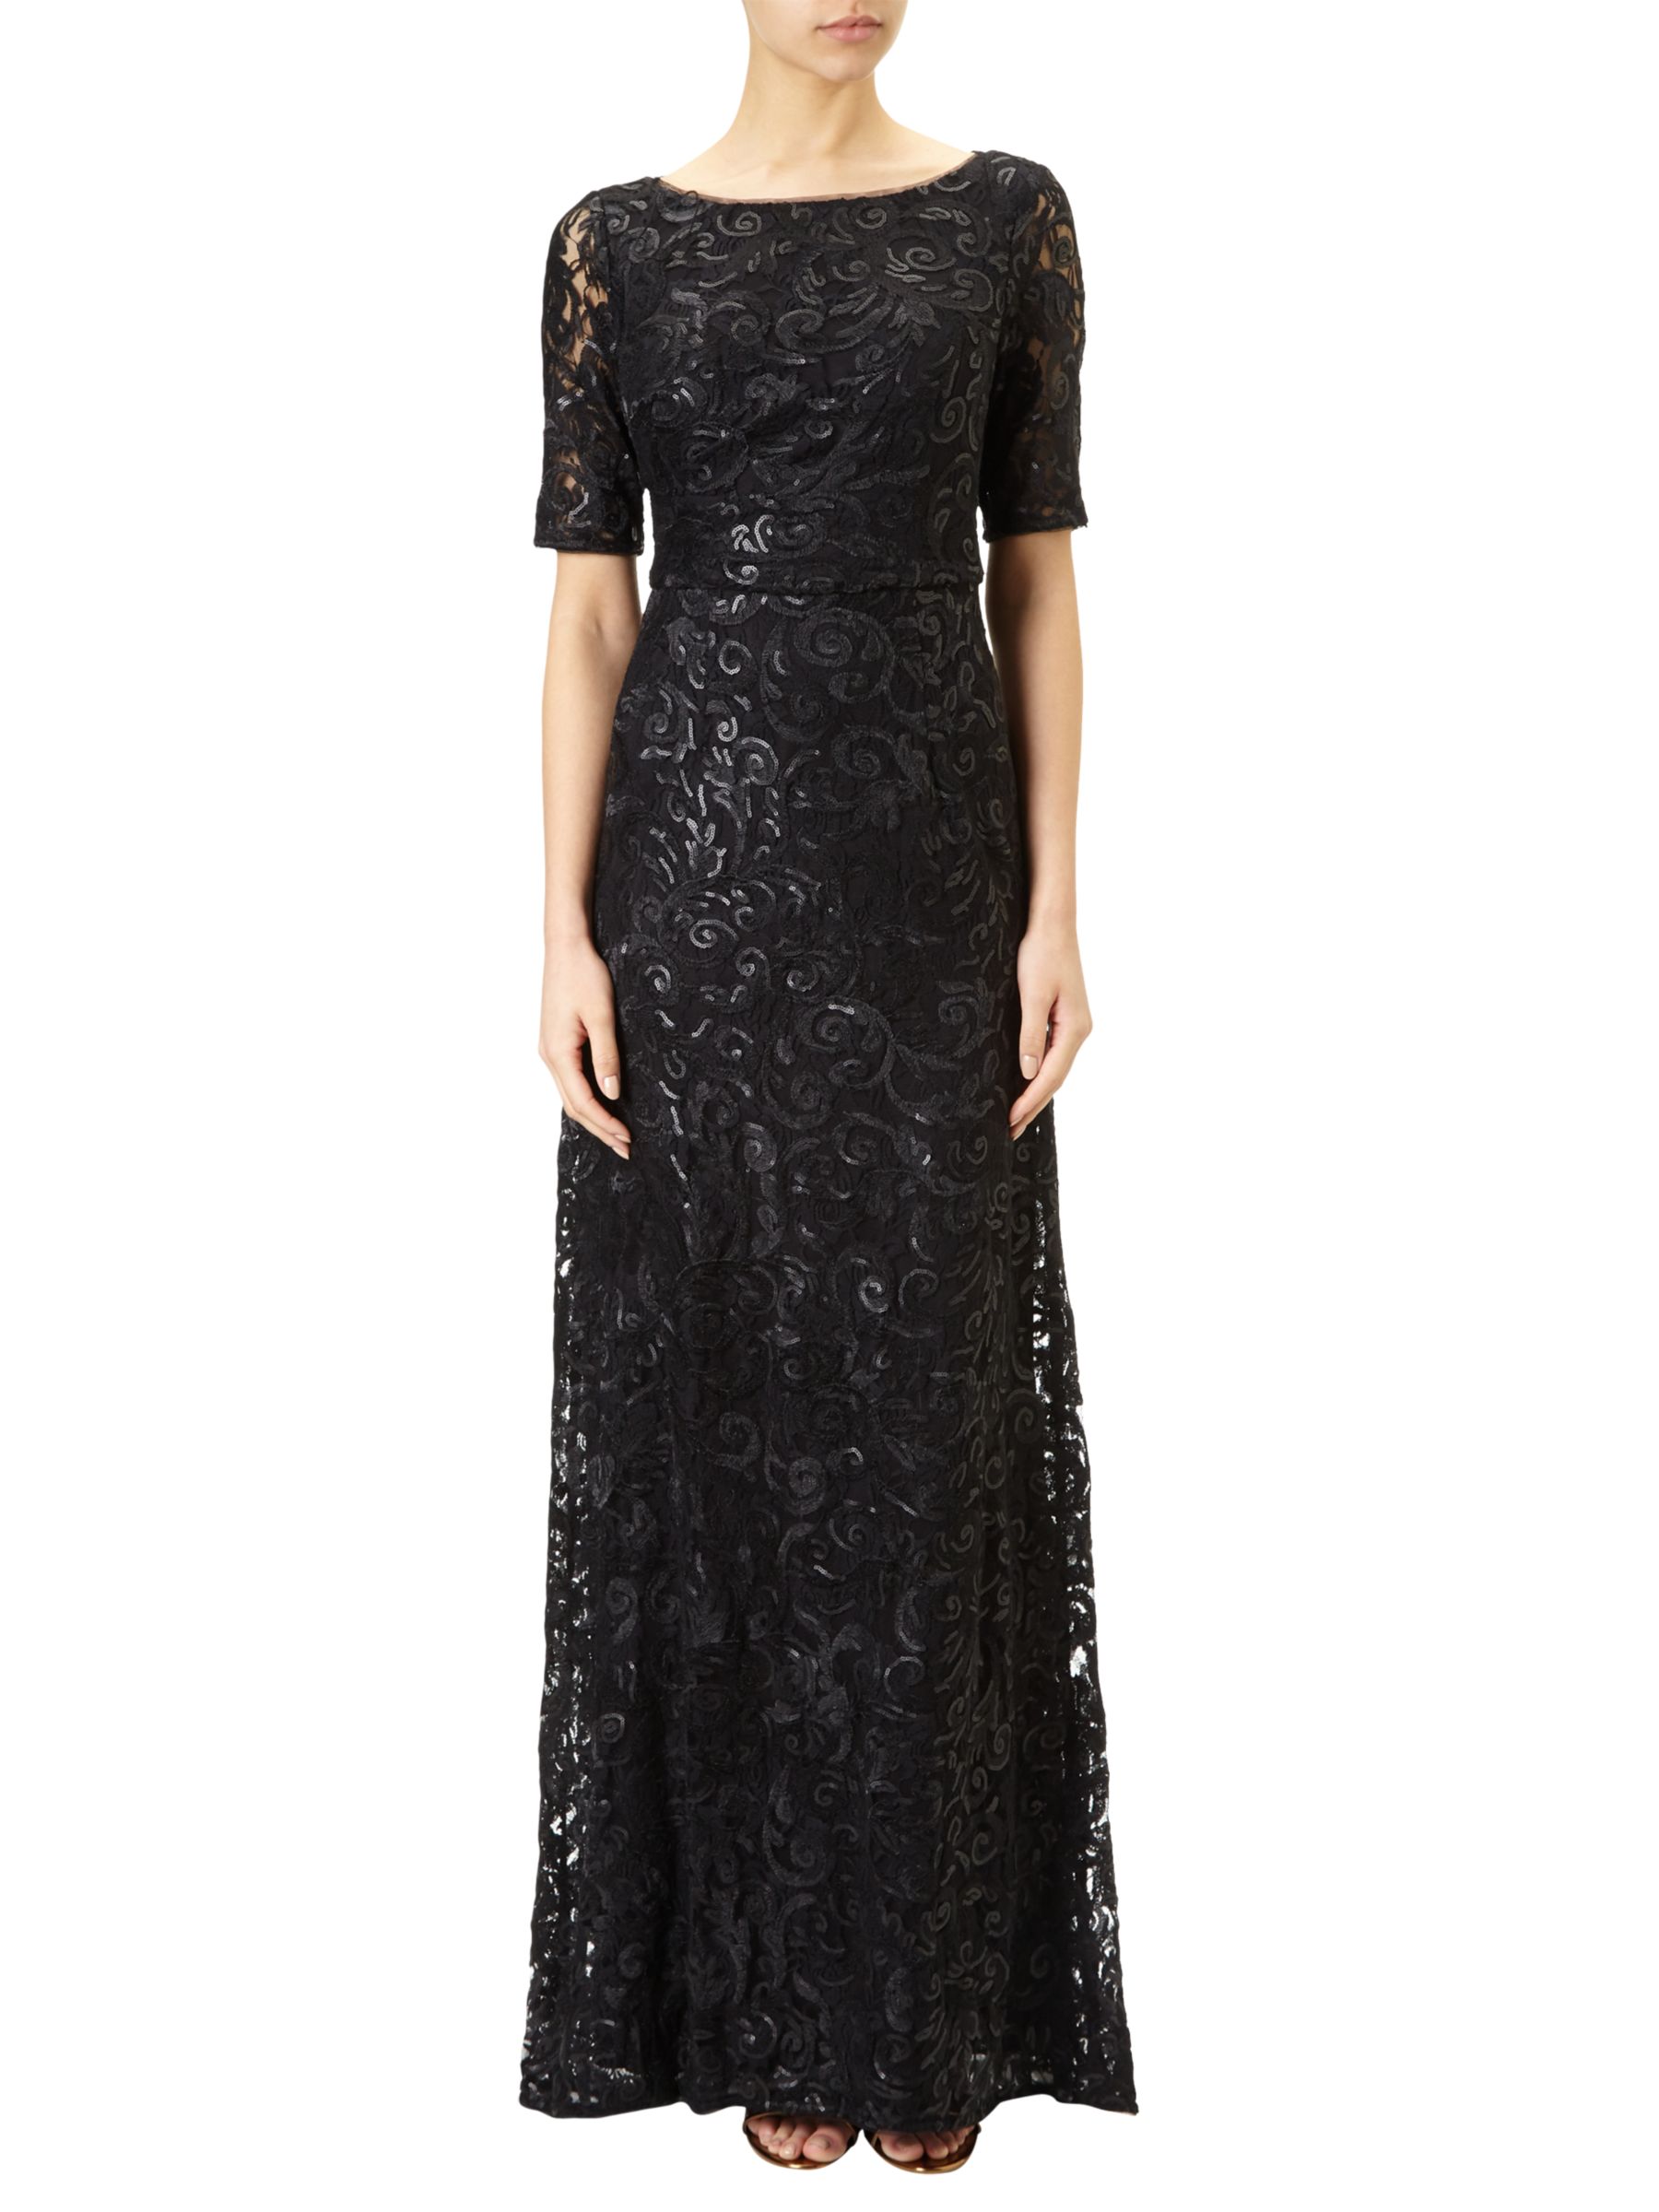 Adrianna Papell Stretch Sequin Mermaid Gown, Black